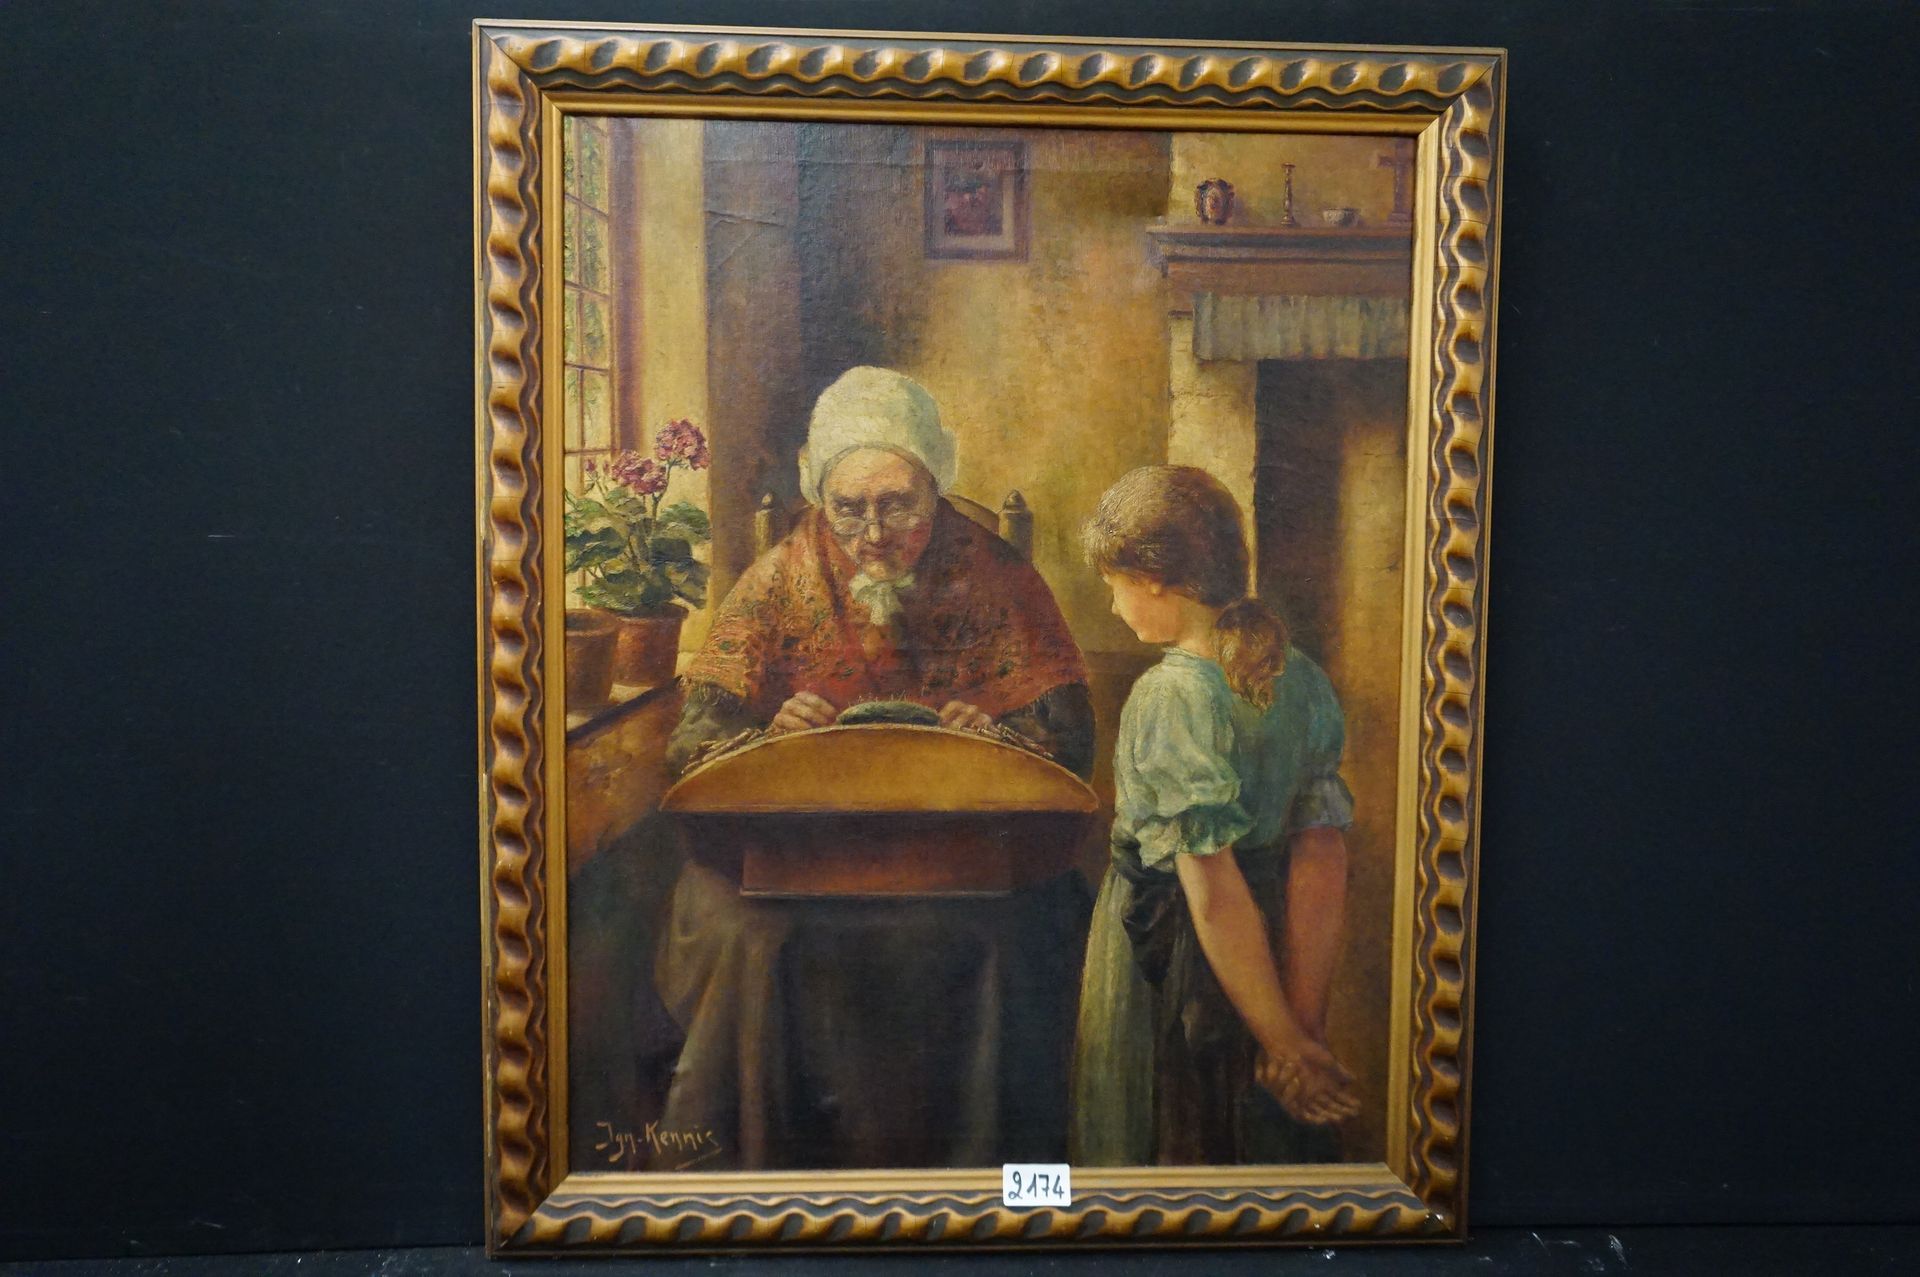 JAN KENNIS (1936 - 2018) "The lacemaker" - Oil on canvas - Signed - 100 x 80 cm